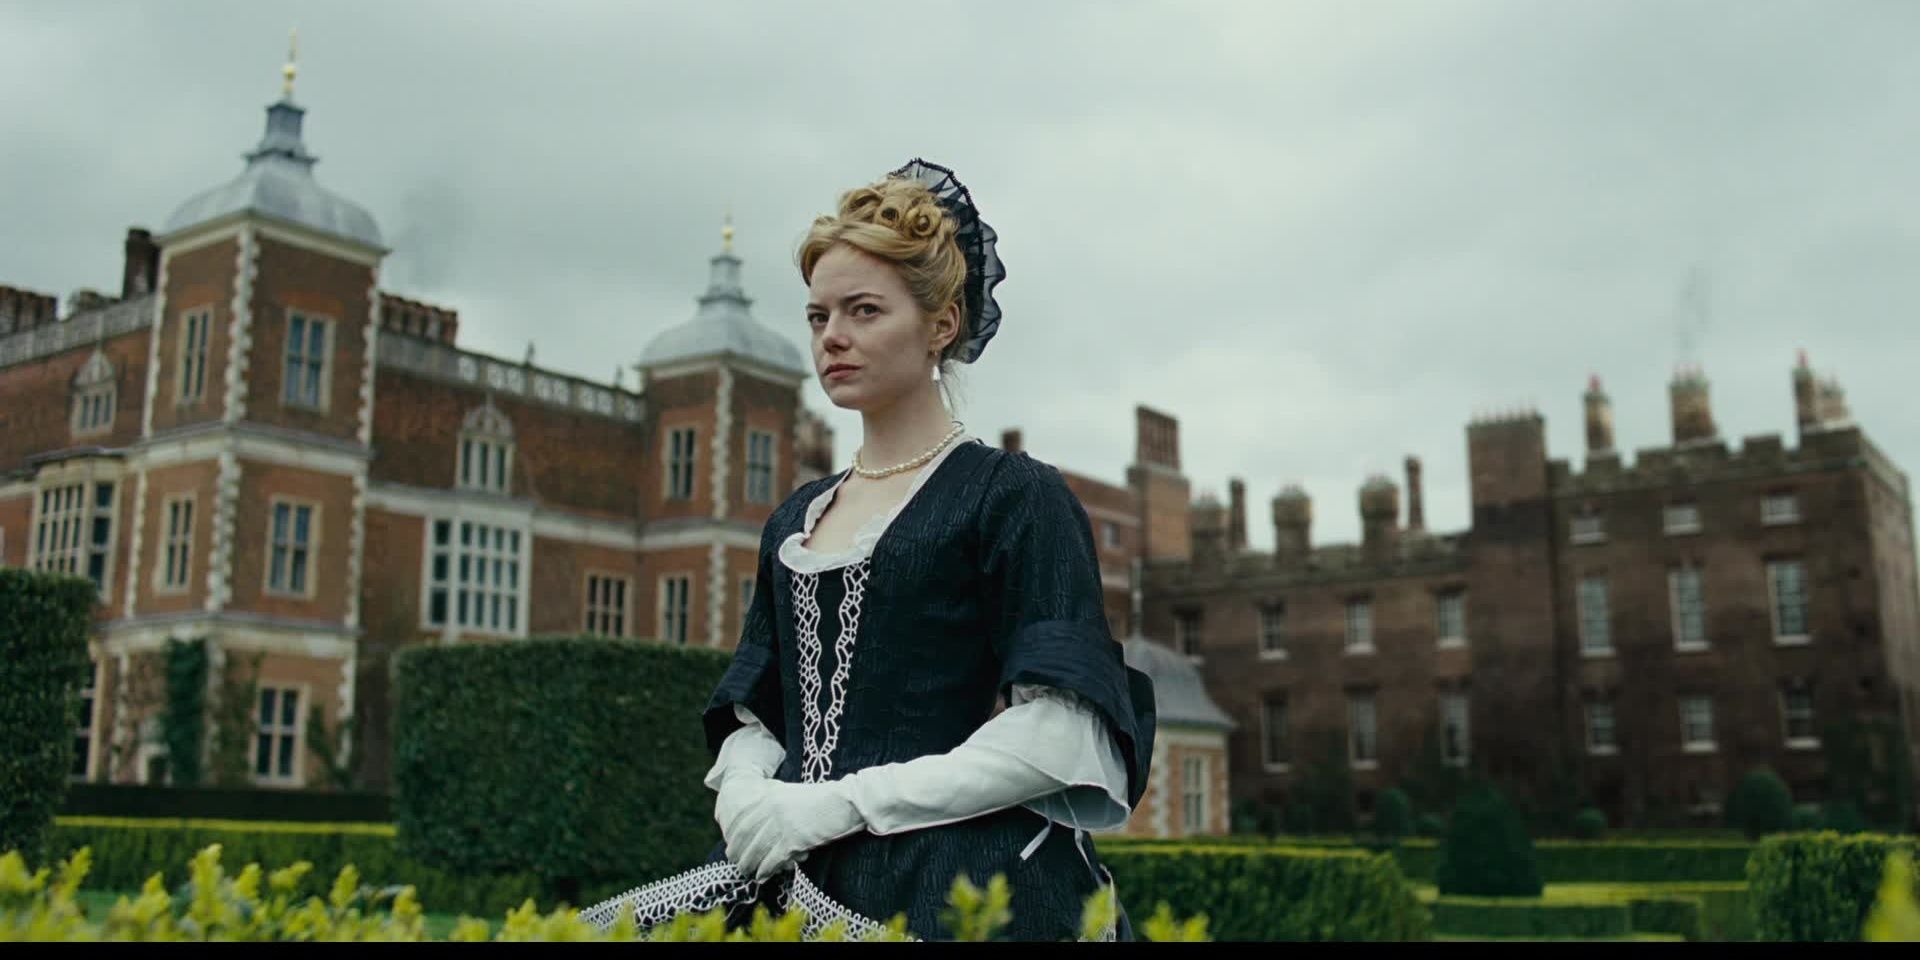 Emma Stone in the gardens in The Favourite